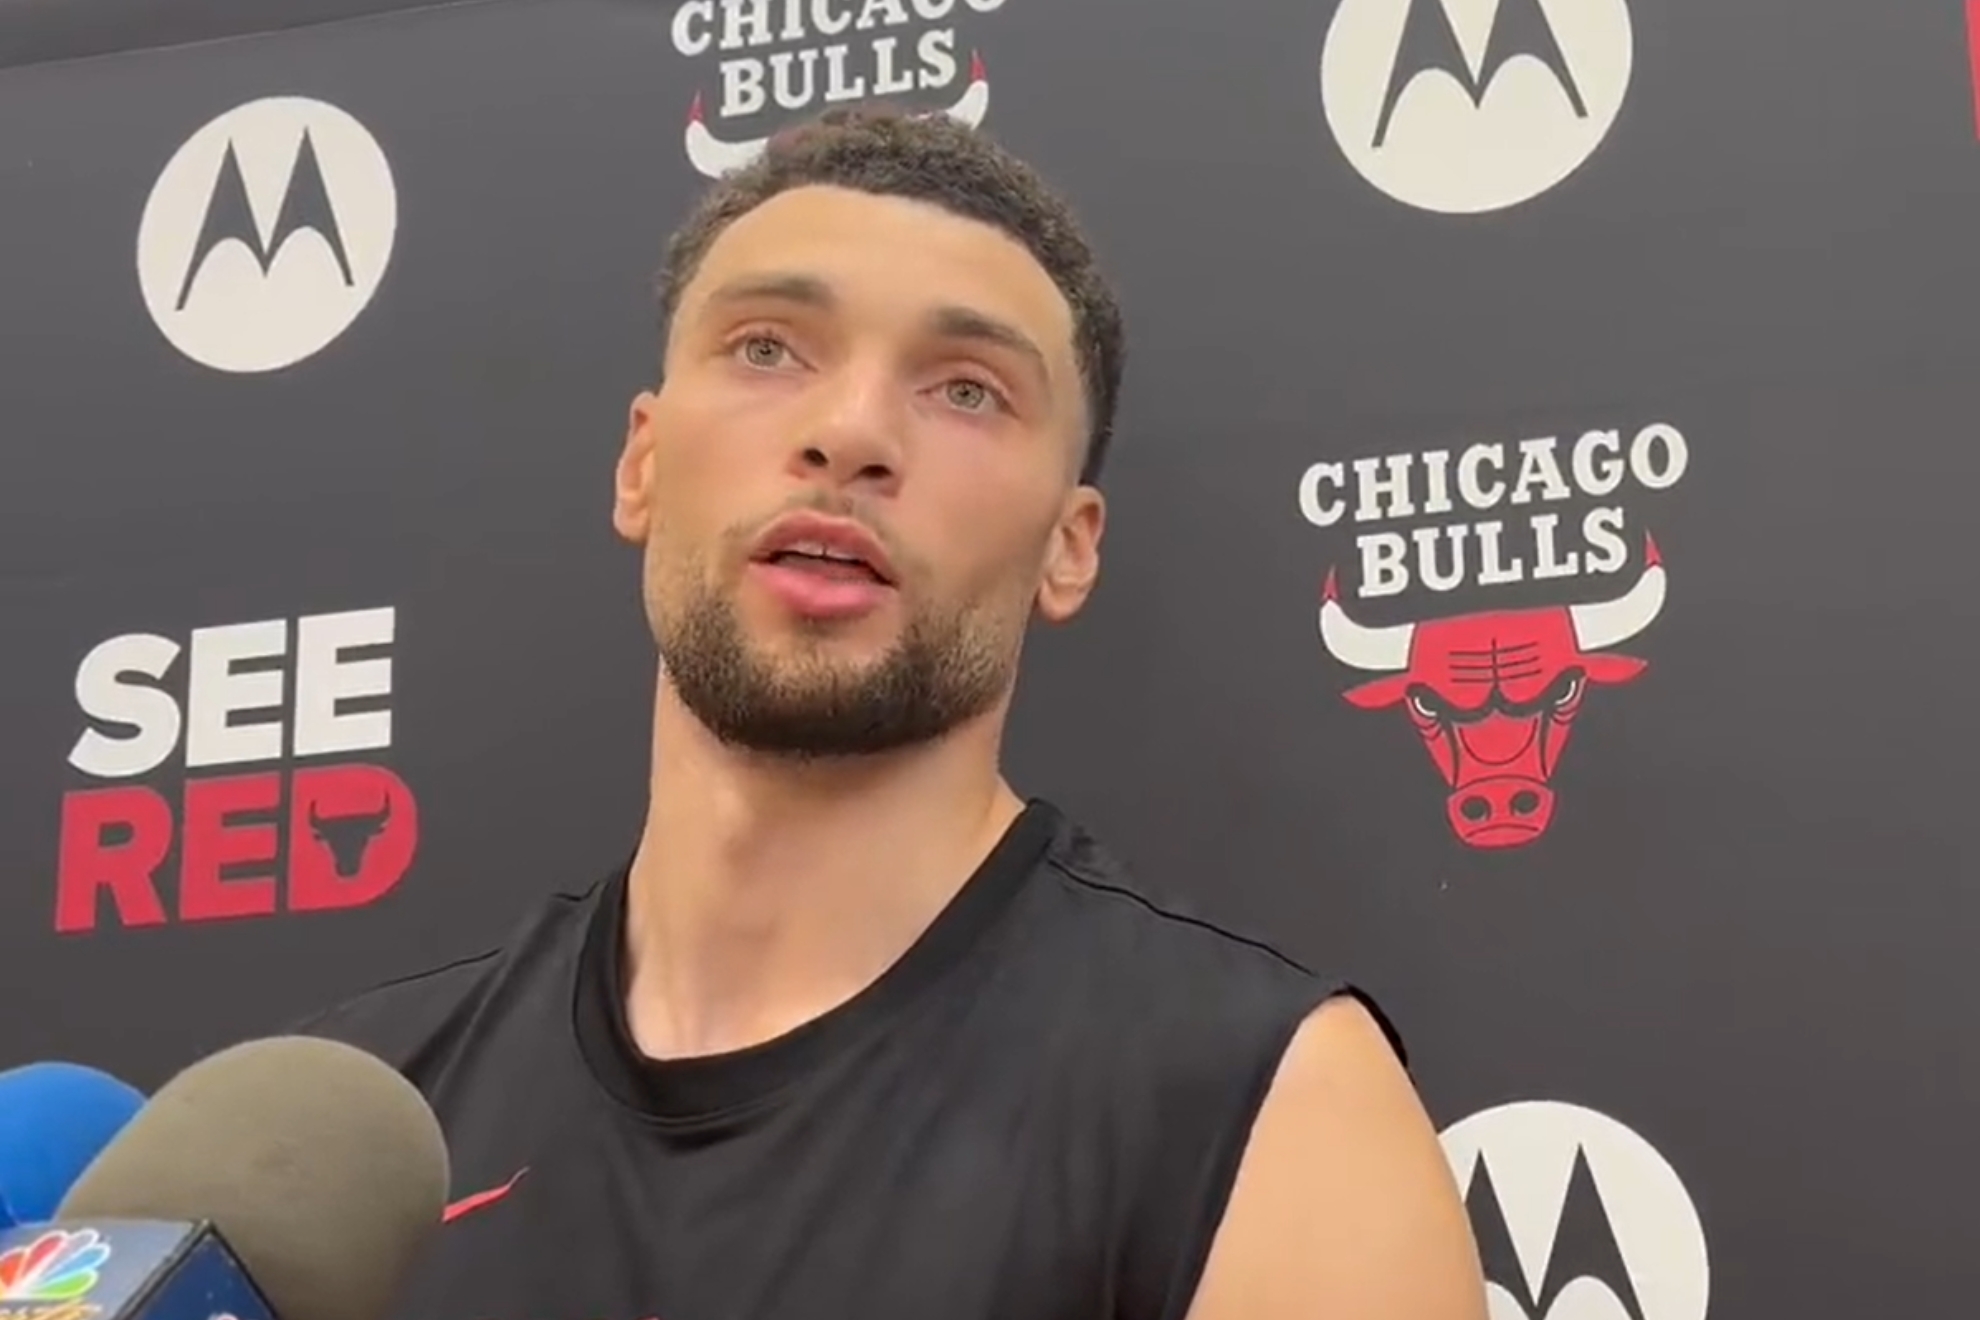 LaVine's career in Chicago has not been ideal